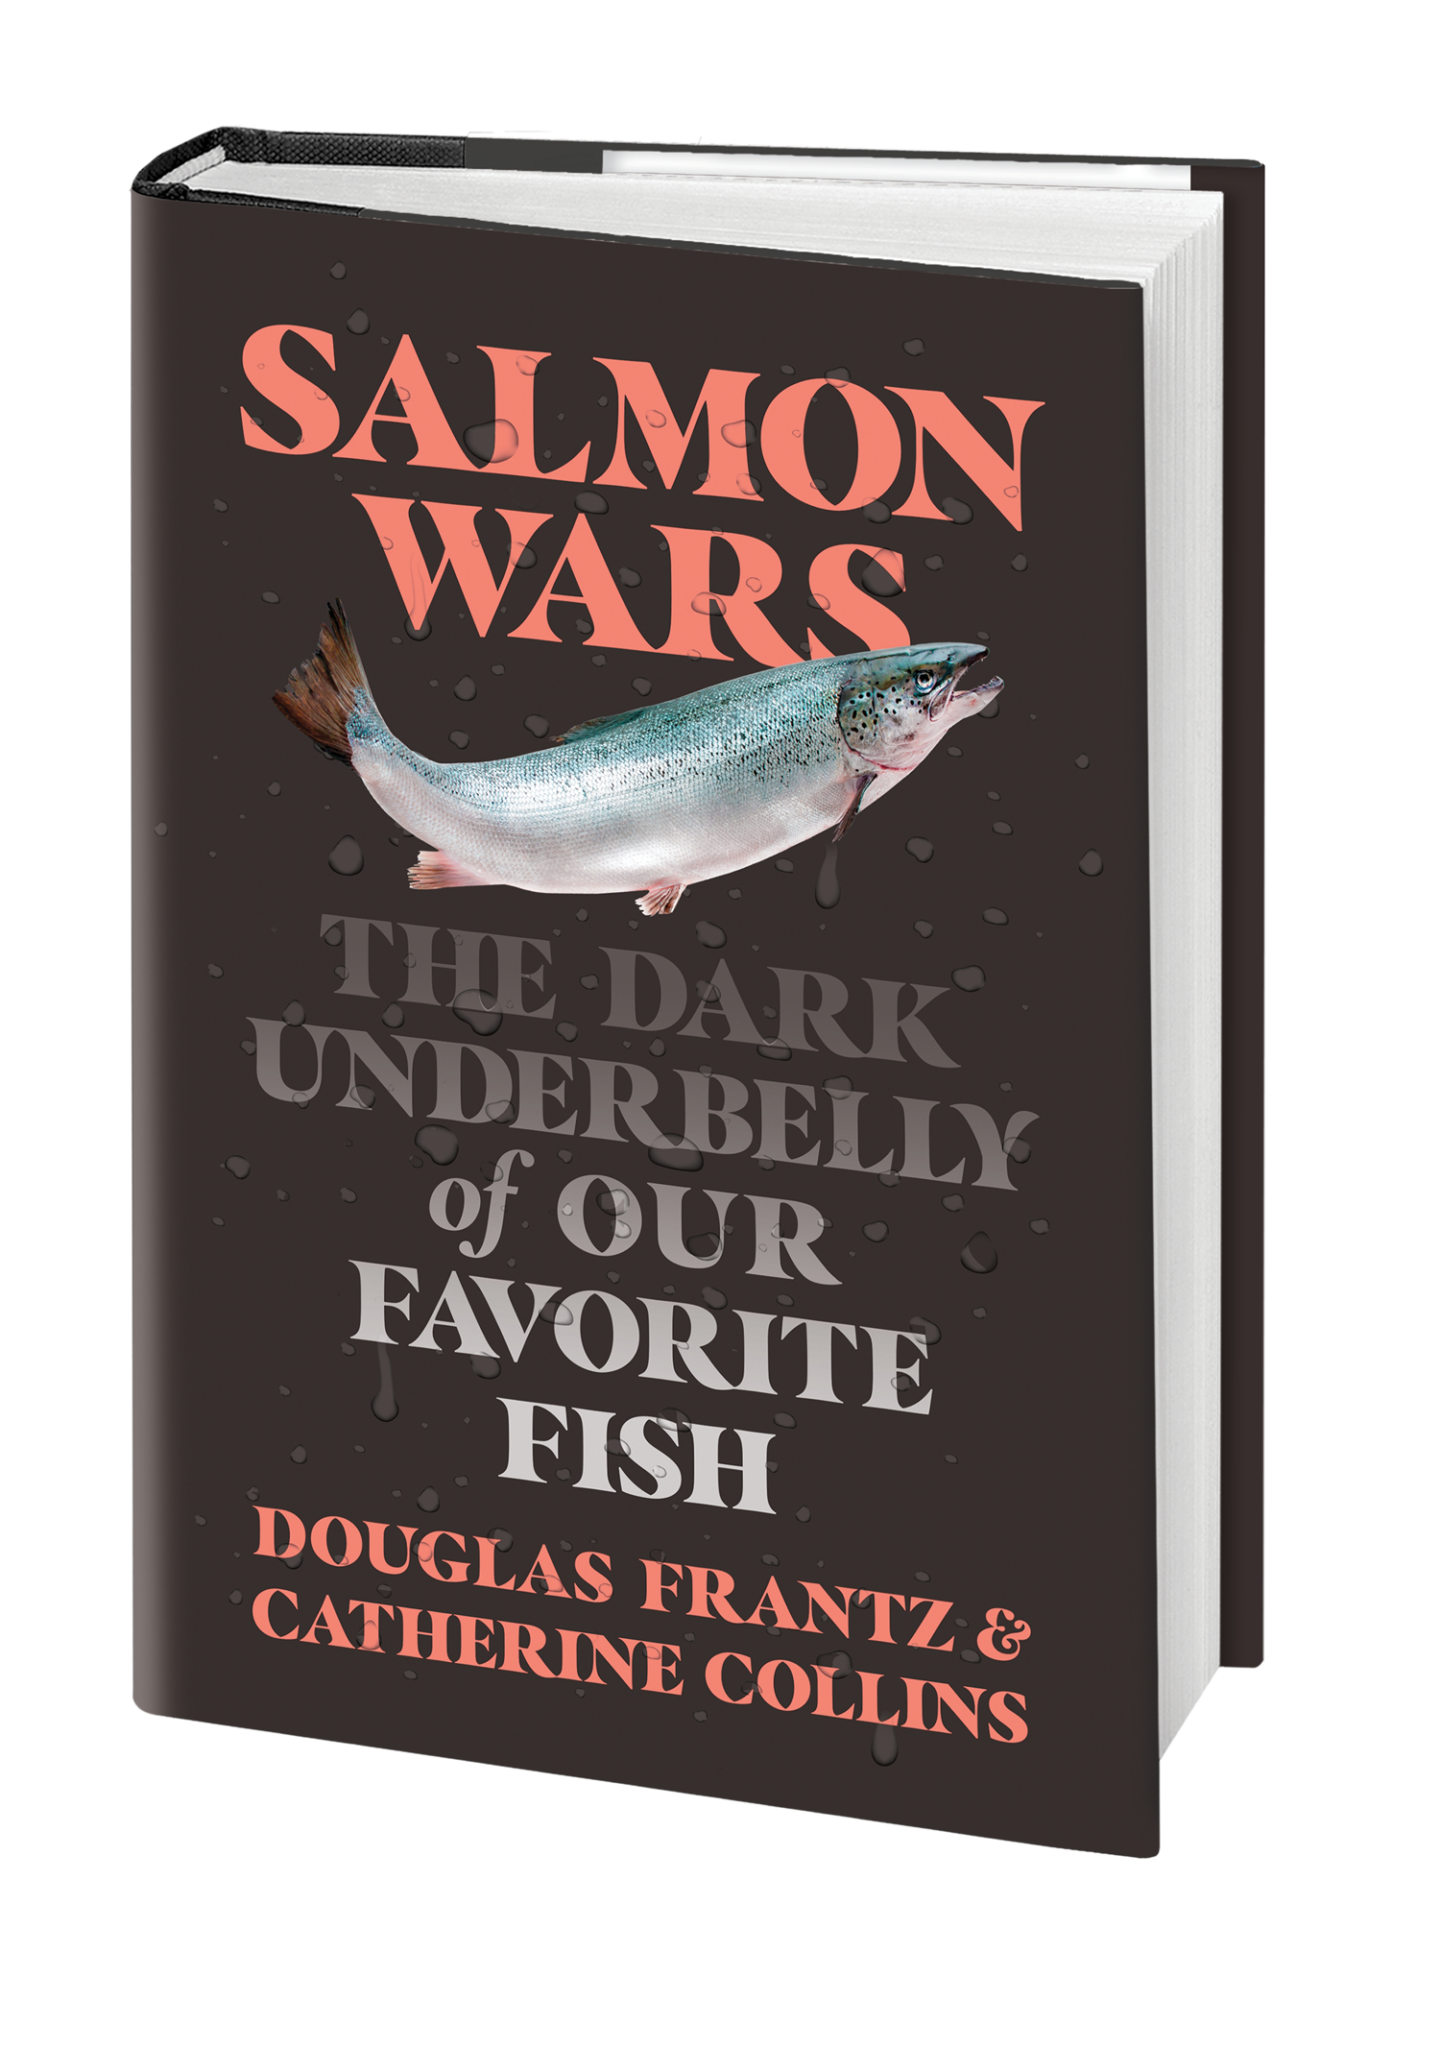 Join WFC for a discussion with journalists Douglas Frantz & Catherine  Collins on their new book 'Salmon Wars: The Dark Underbelly of Our Favorite  Fish' – Wild Fish Conservancy Northwest